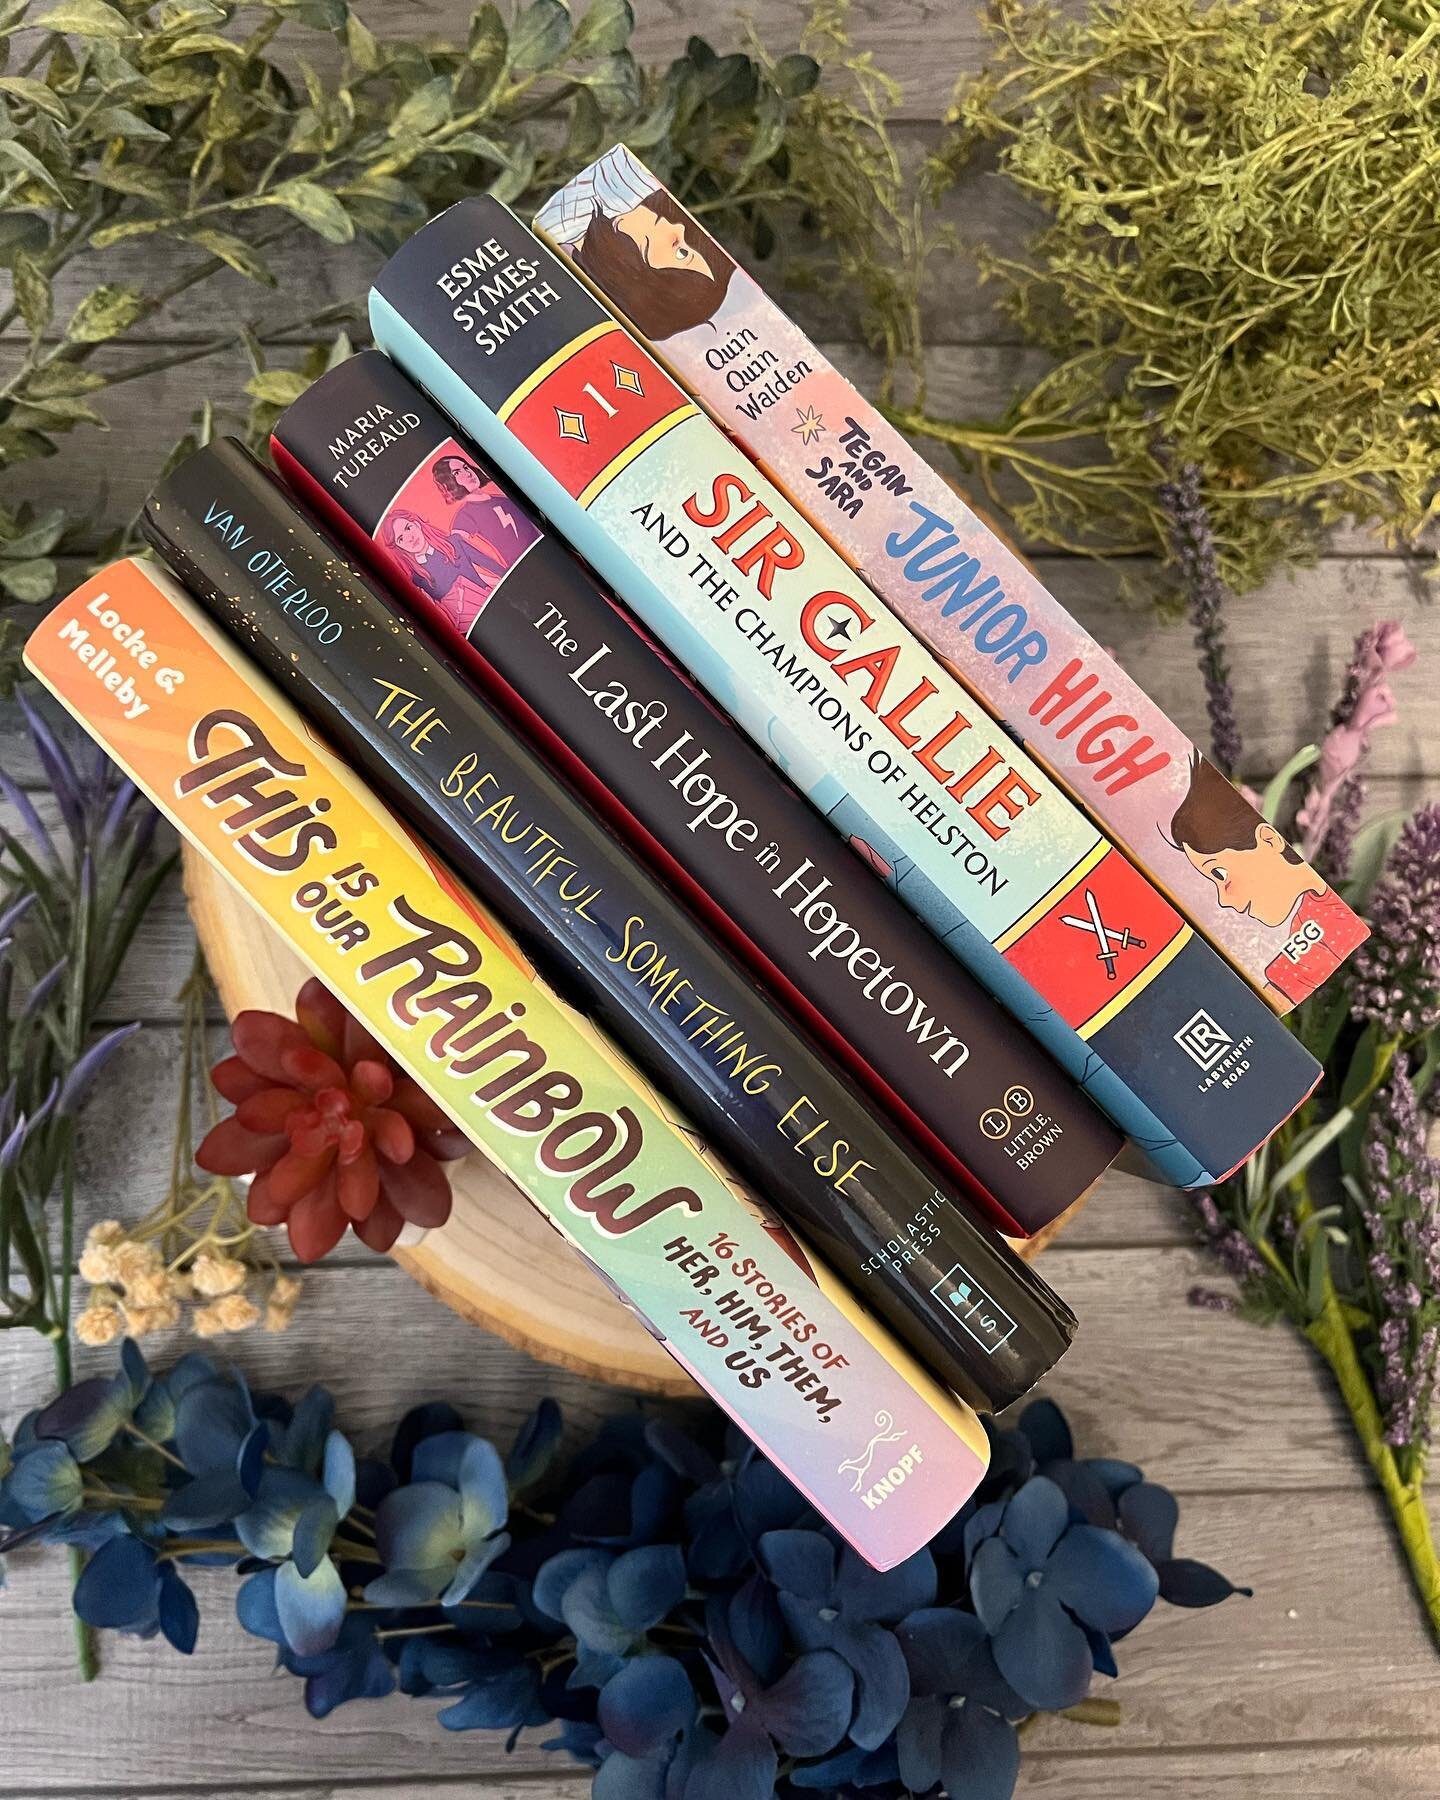 🌈 Happy Pride 🏳️&zwj;🌈

Definitely check some of these wonderful books out!

#mgbooks #lgbtqreads #tbr #currentlyreading